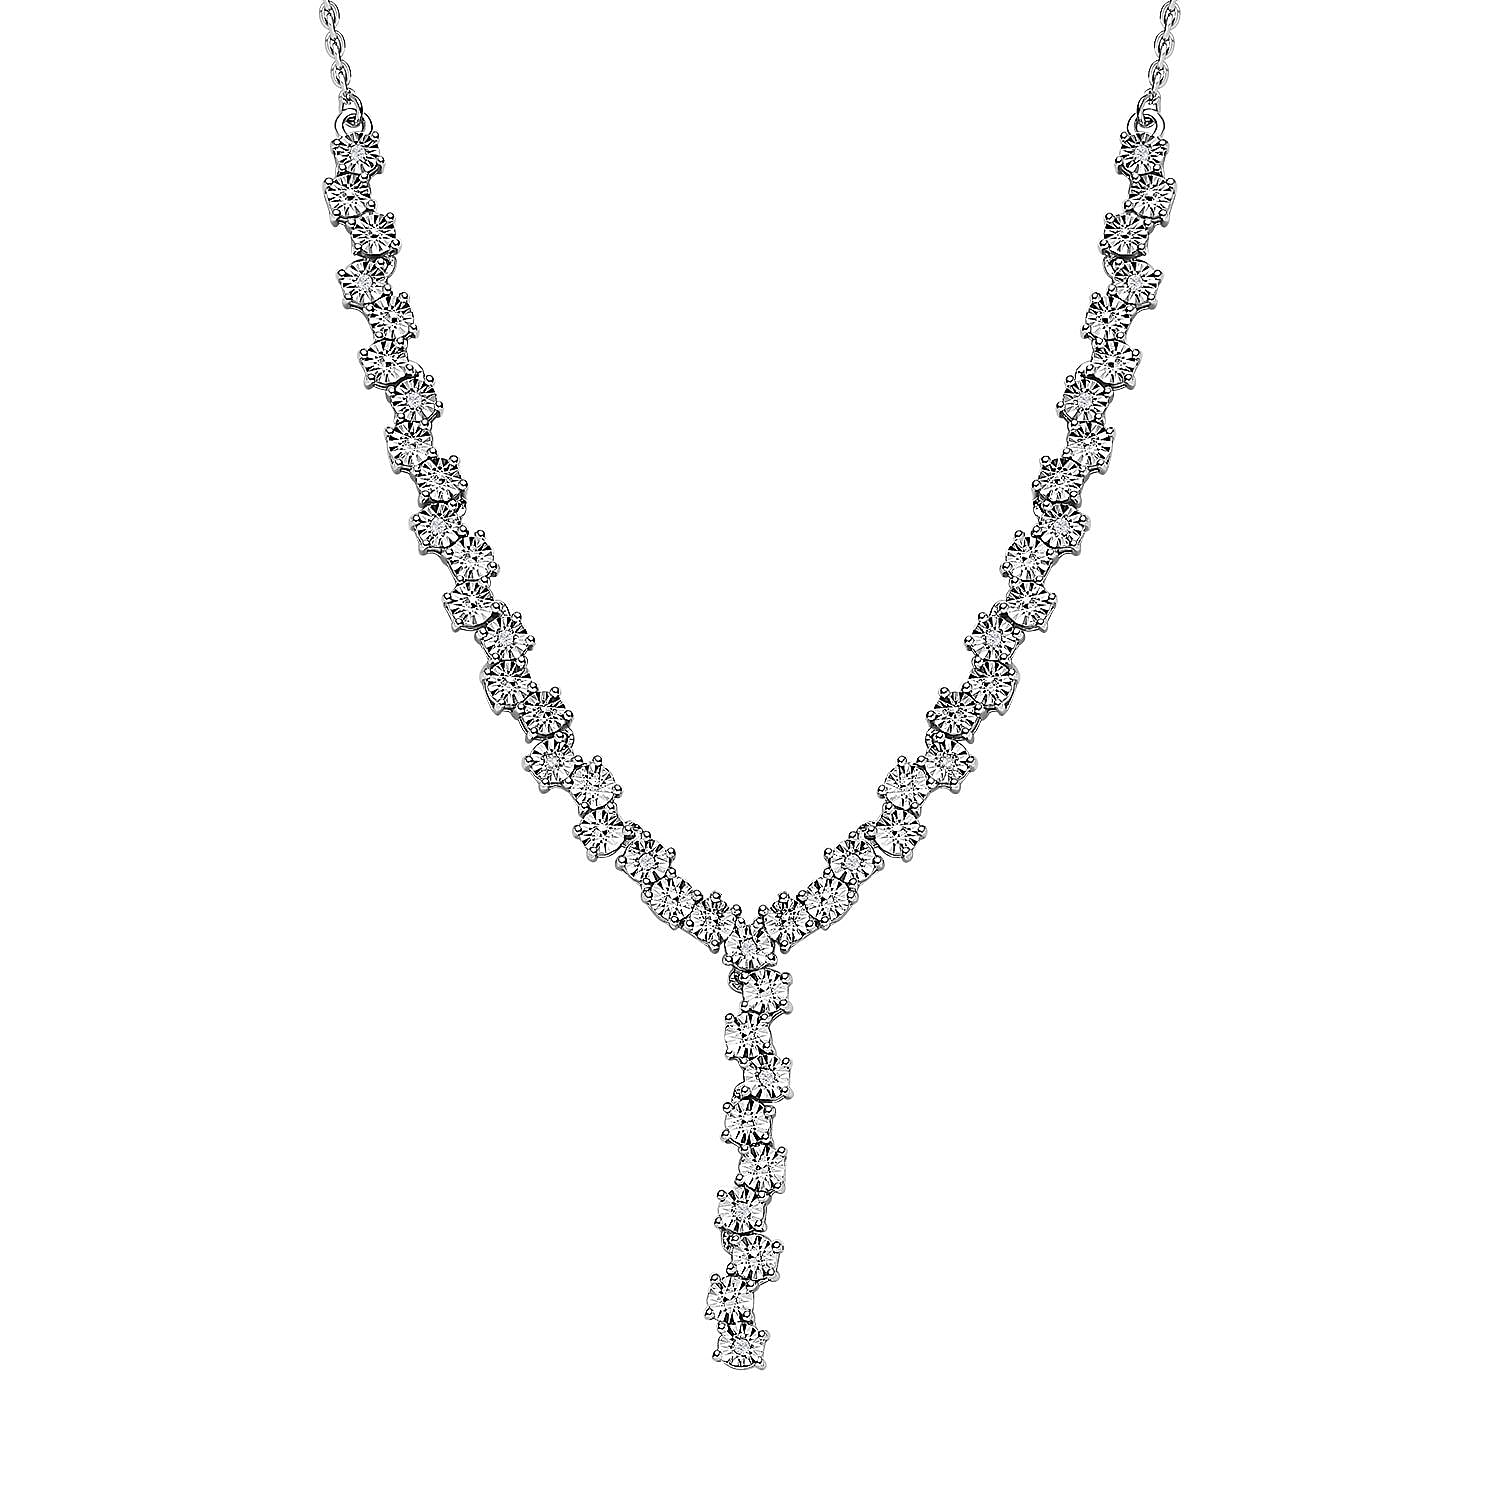 Red Carpet Collection - Diamond Necklace (Size - 18) in Platinum Overlay Sterling Silver, Silver Wt. 11.80 Gms